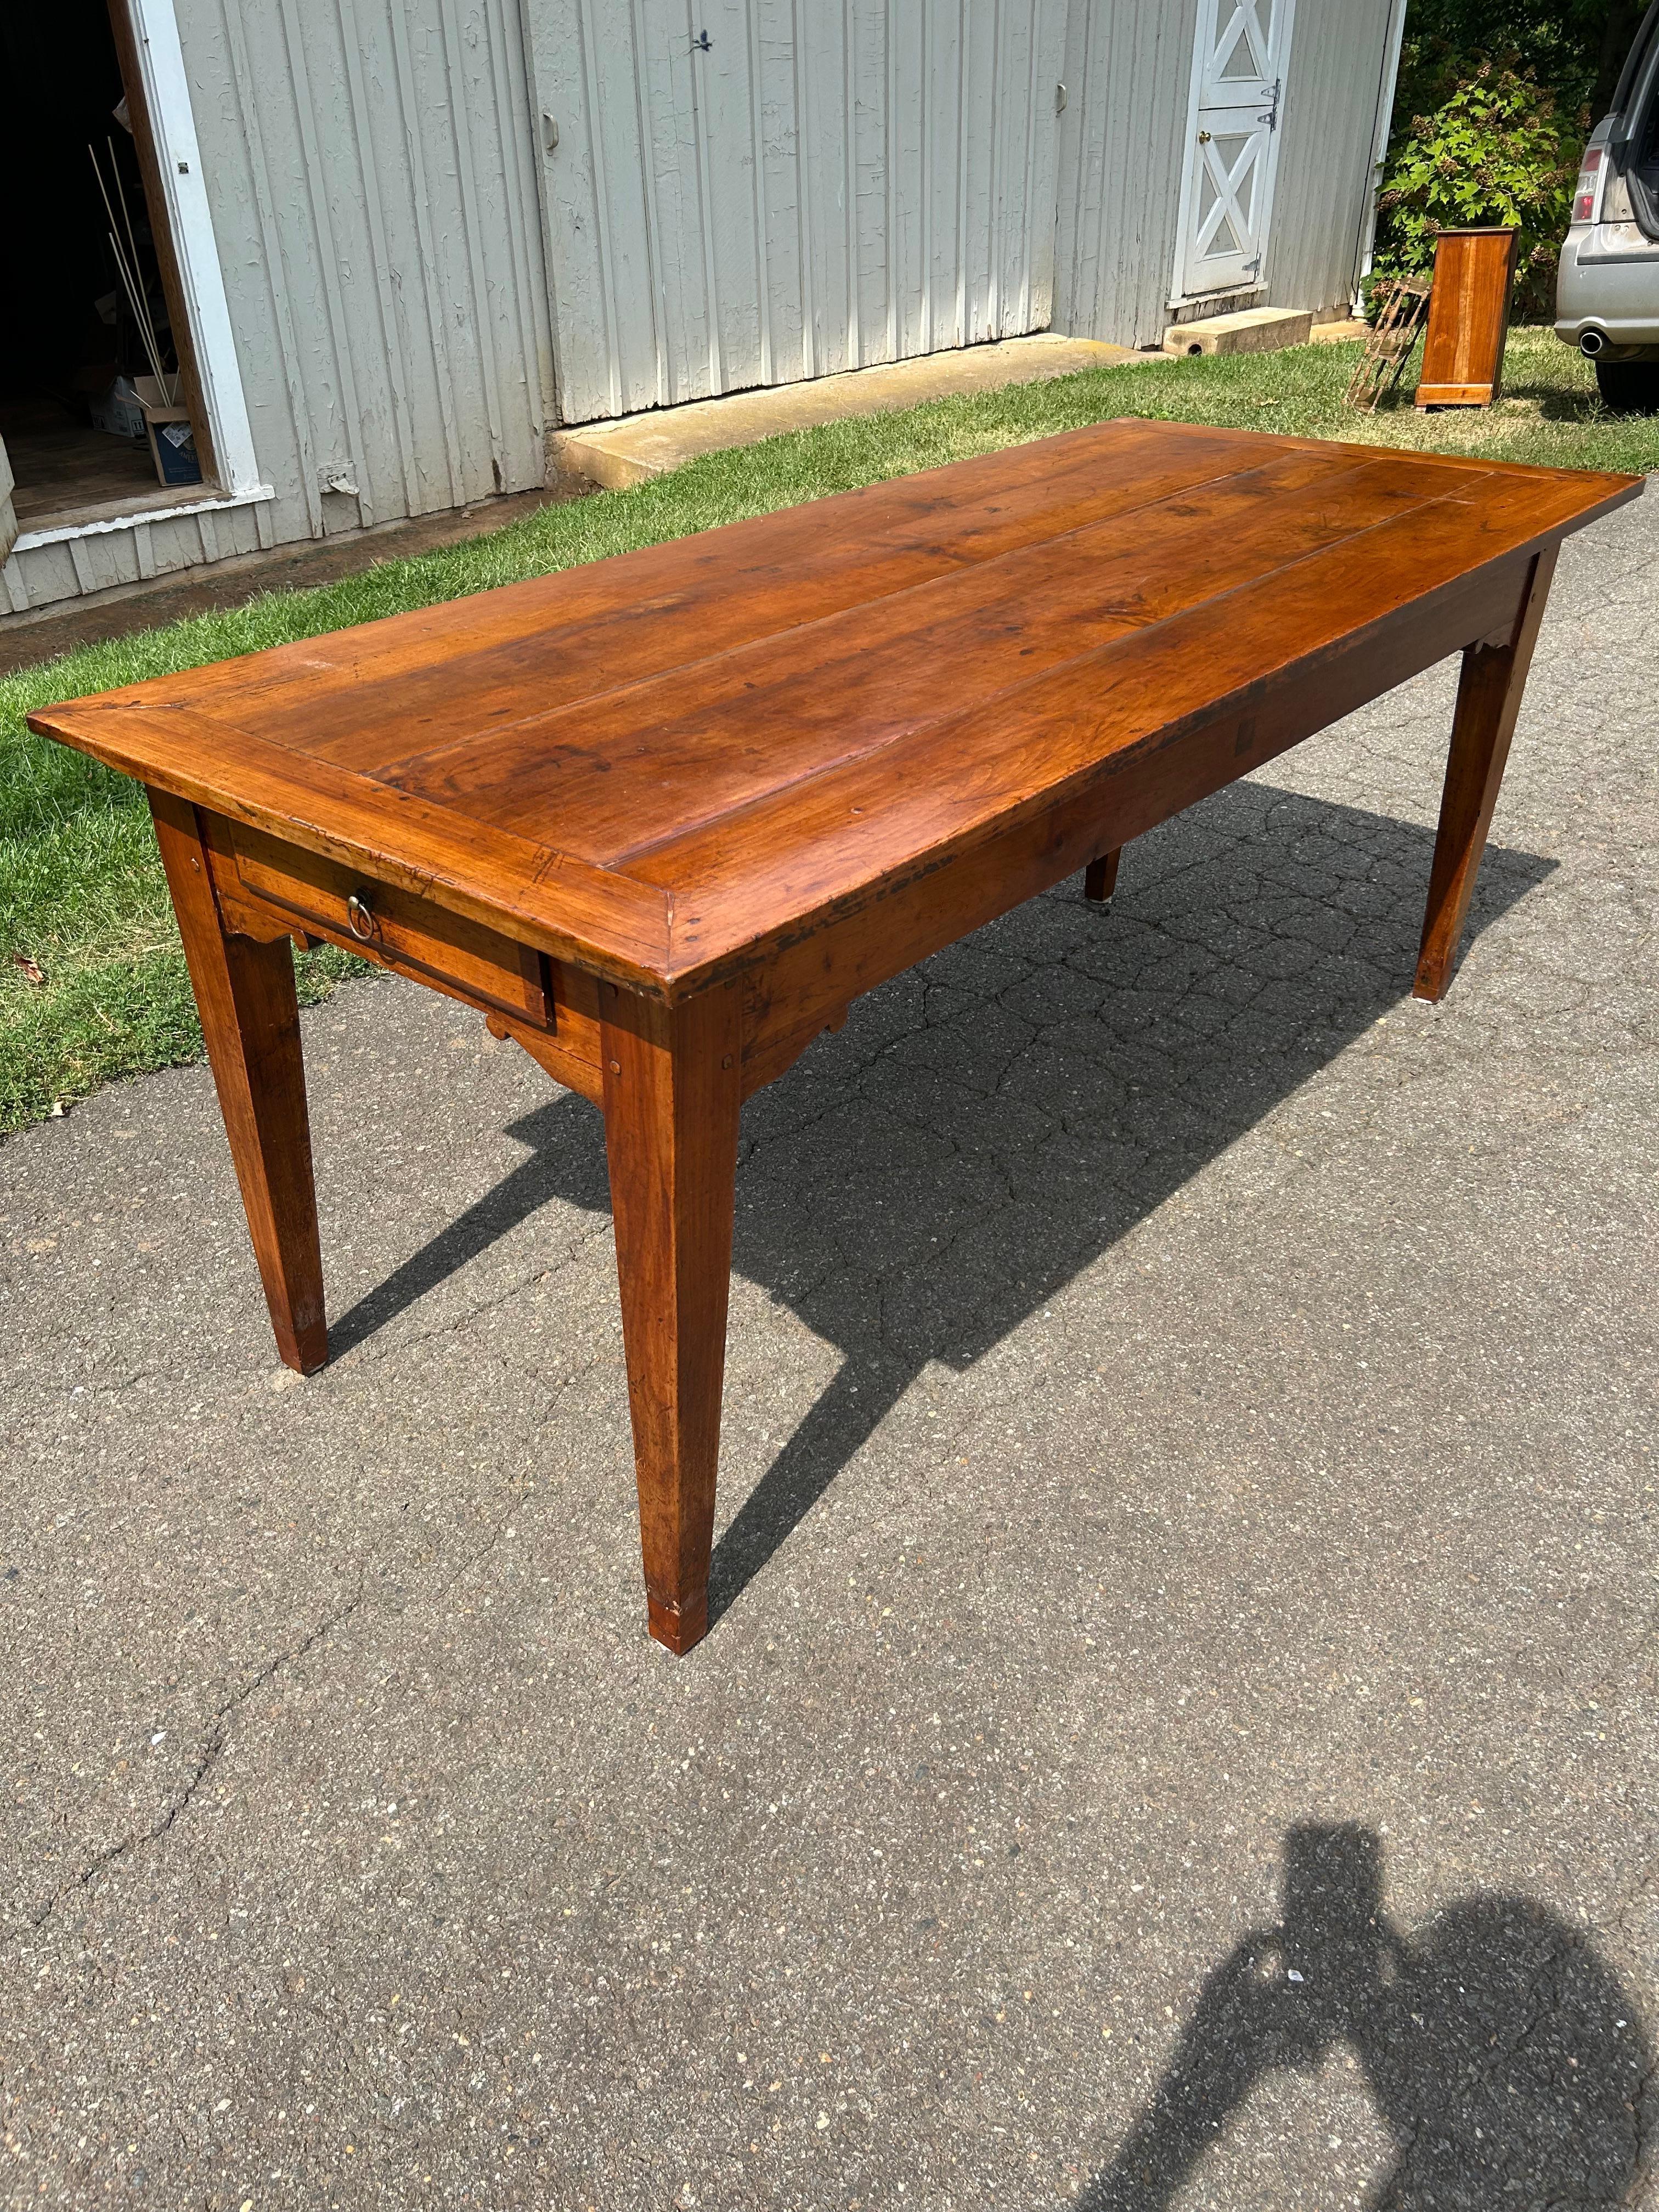 French Provincial Louis XVI style Farm Table. Wonderful proportions with a paneled top, single drawer with shaped aprons over straight tapering legs. Made of Wild cherry with a beautiful Lustrous Color and Rich Patination.  Normandy Circa 1830.